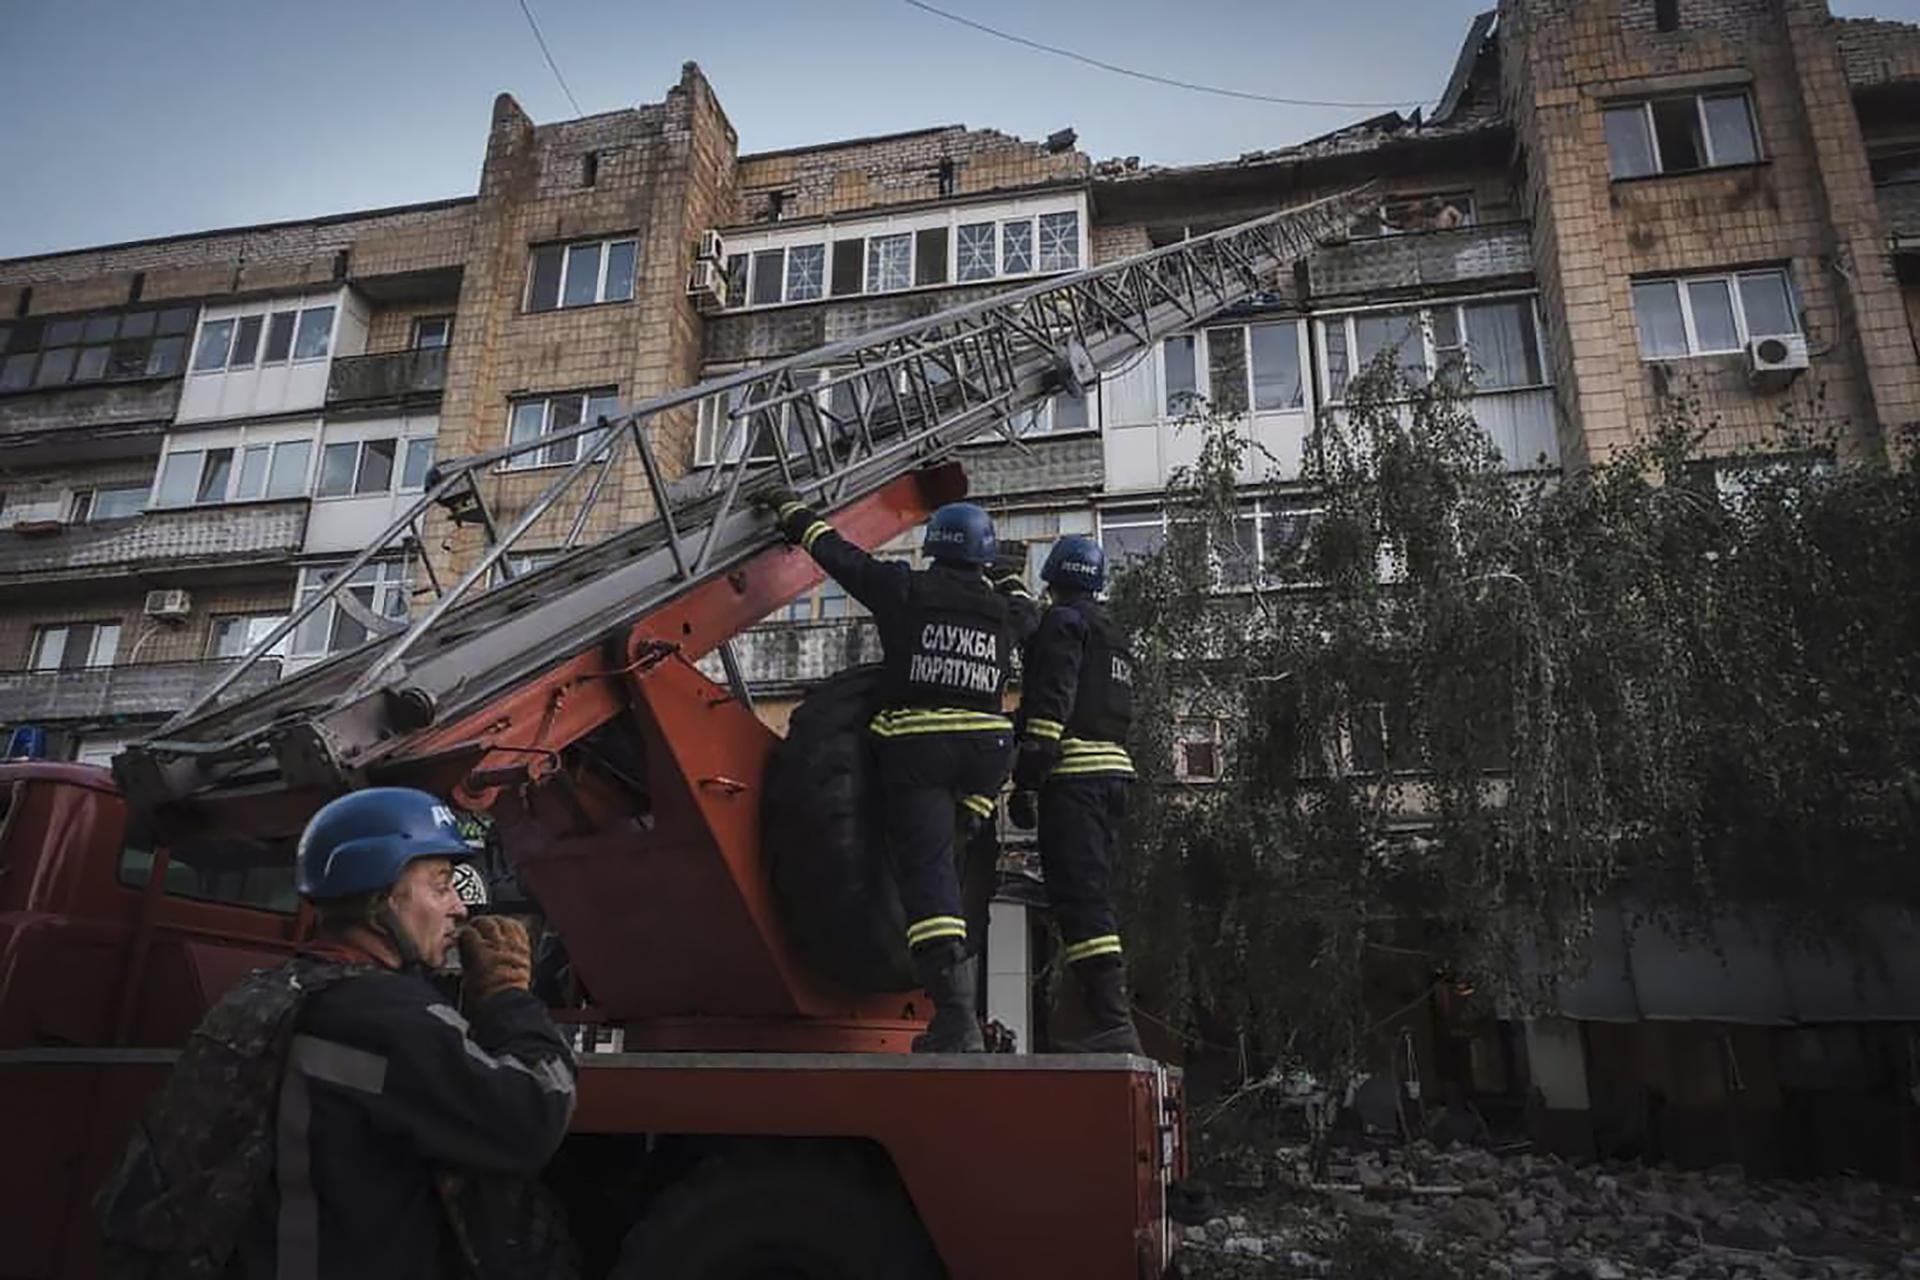 A handout photo made available by the State Emergency Service shows Ukrainian rescuers working on a site where a rocket hit the city of Pokrovsk, Donetsk area, Ukraine, 07 August 2023. EFE-EPA/STATE EMERGENCY SERVICE HANDOUT EDITORIAL USE ONLY/NO SALES
